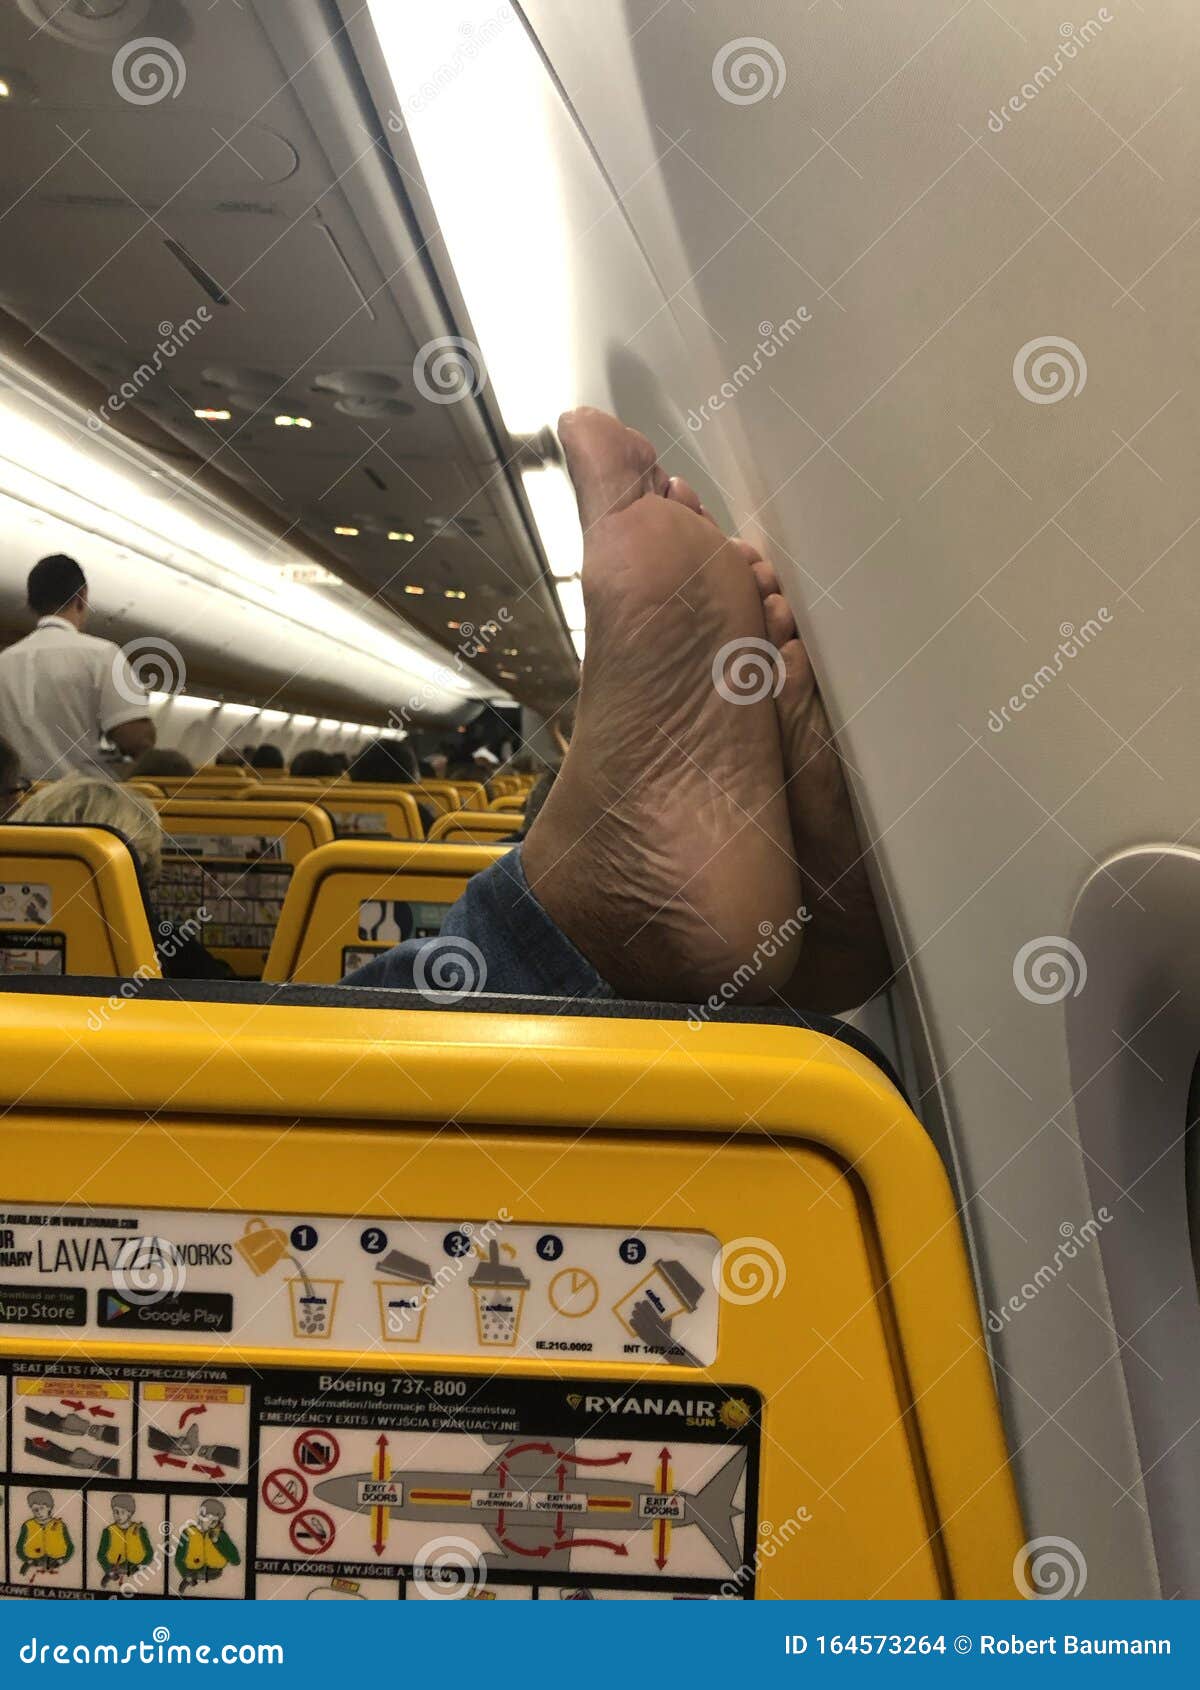 Giotto Dibondon æg Bulk 04/11/2019 - Ryanair Flight from Warsaw in Poland To Amman in Jordan -  Passenger Resting His Feet on the Wall Inside the Aeroplane Editorial Stock  Image - Image of passengers, poland: 164573264